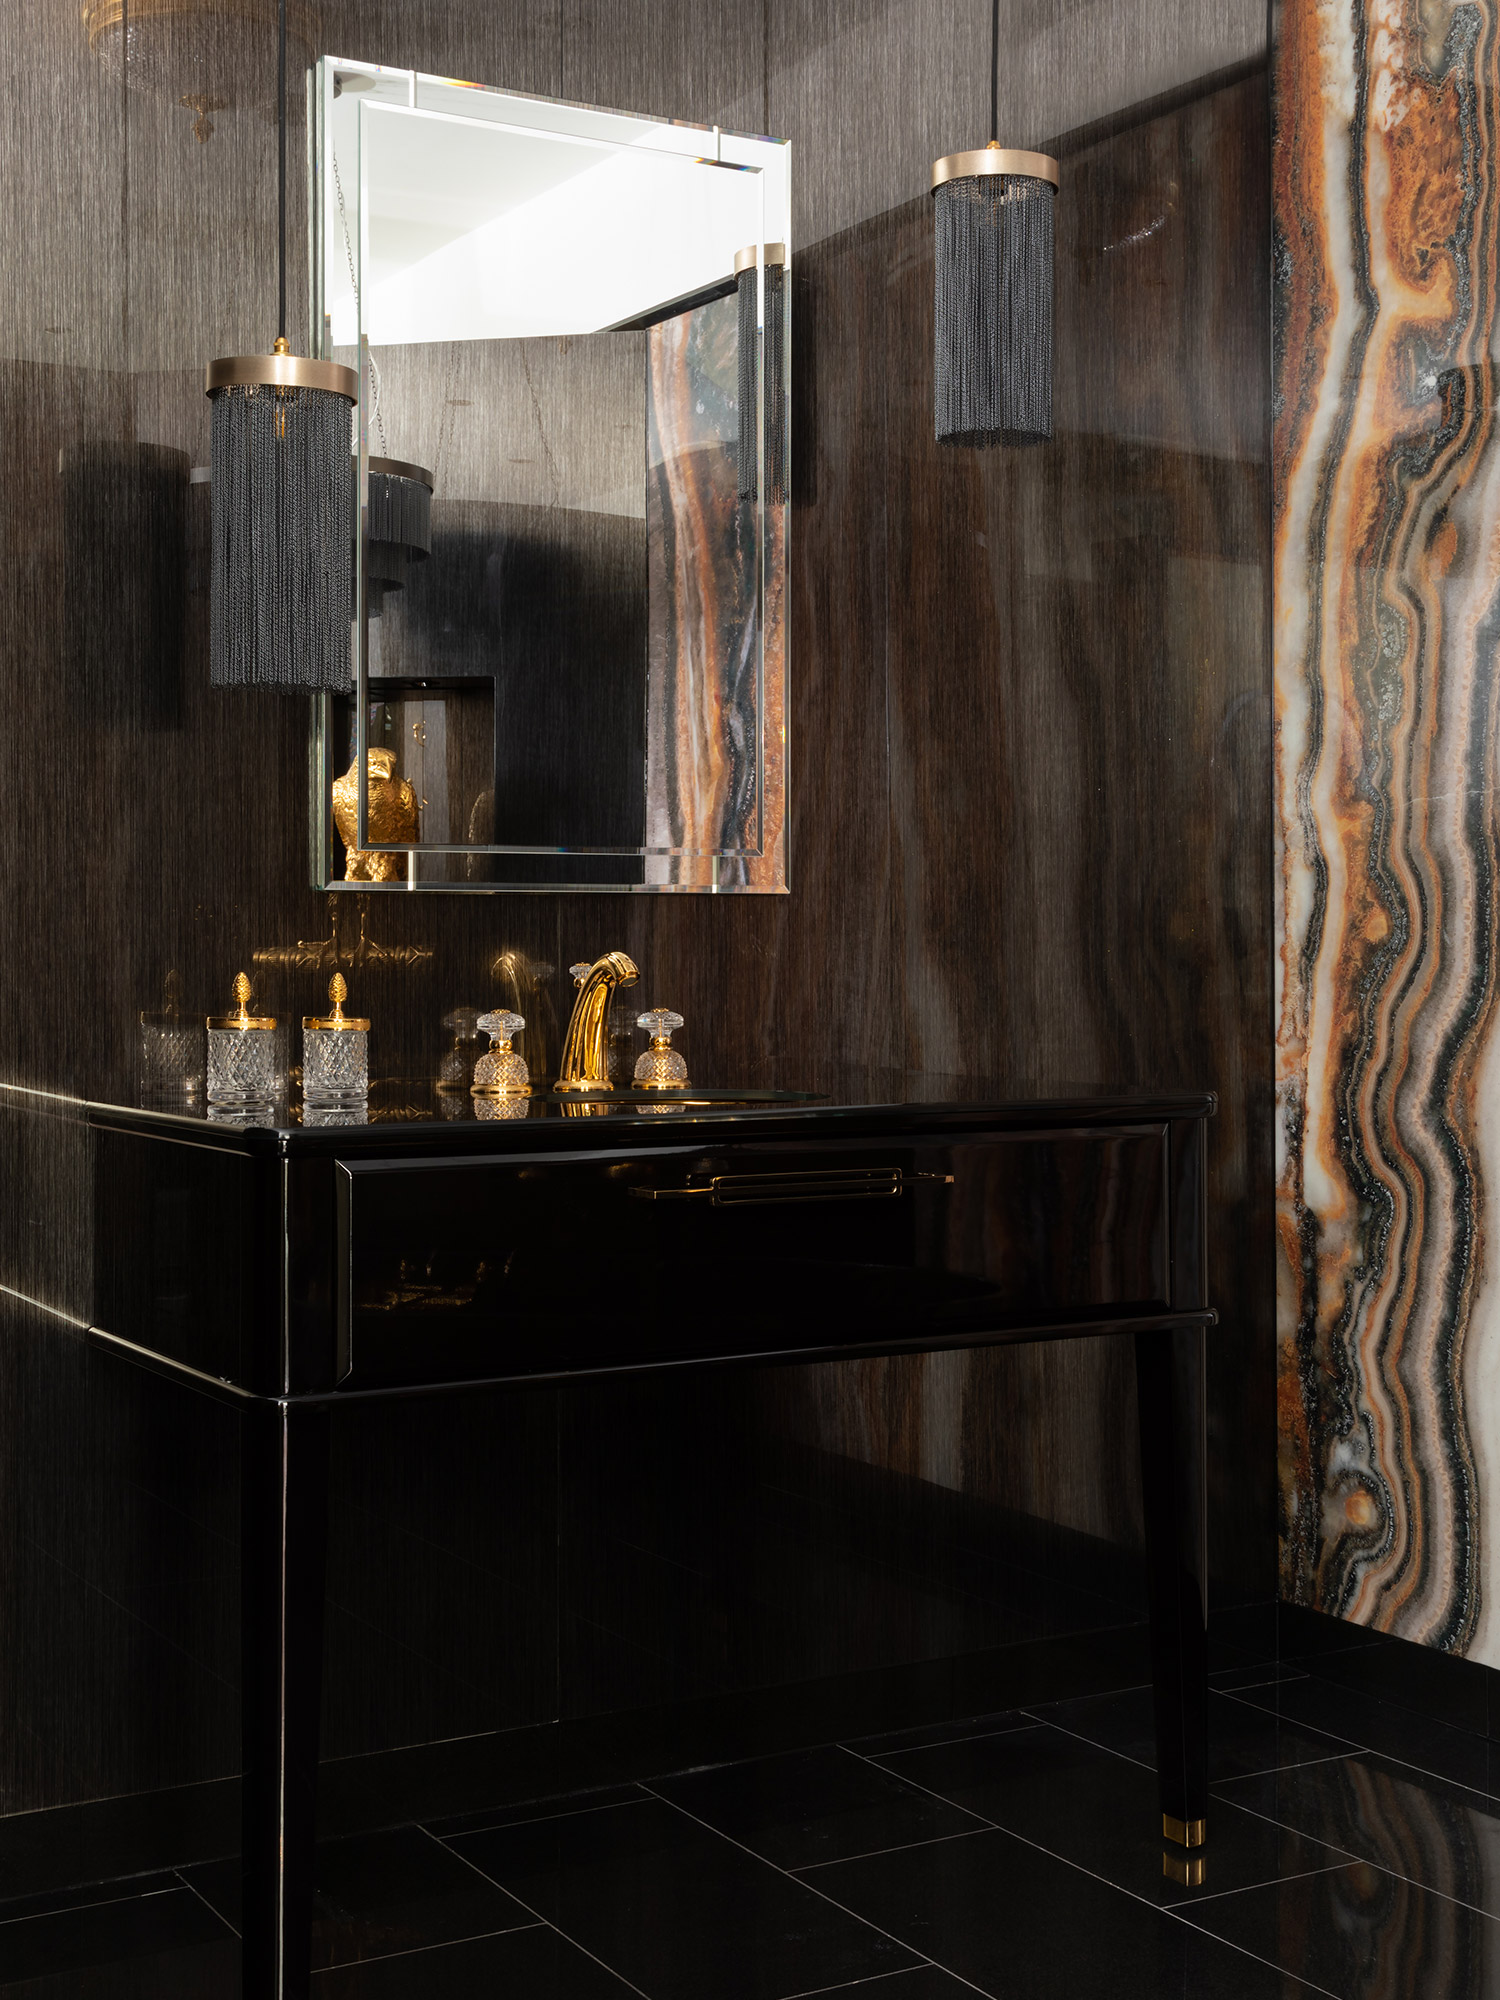 West One Bathrooms Mayfair Showroom South Audley Street 2018 2a